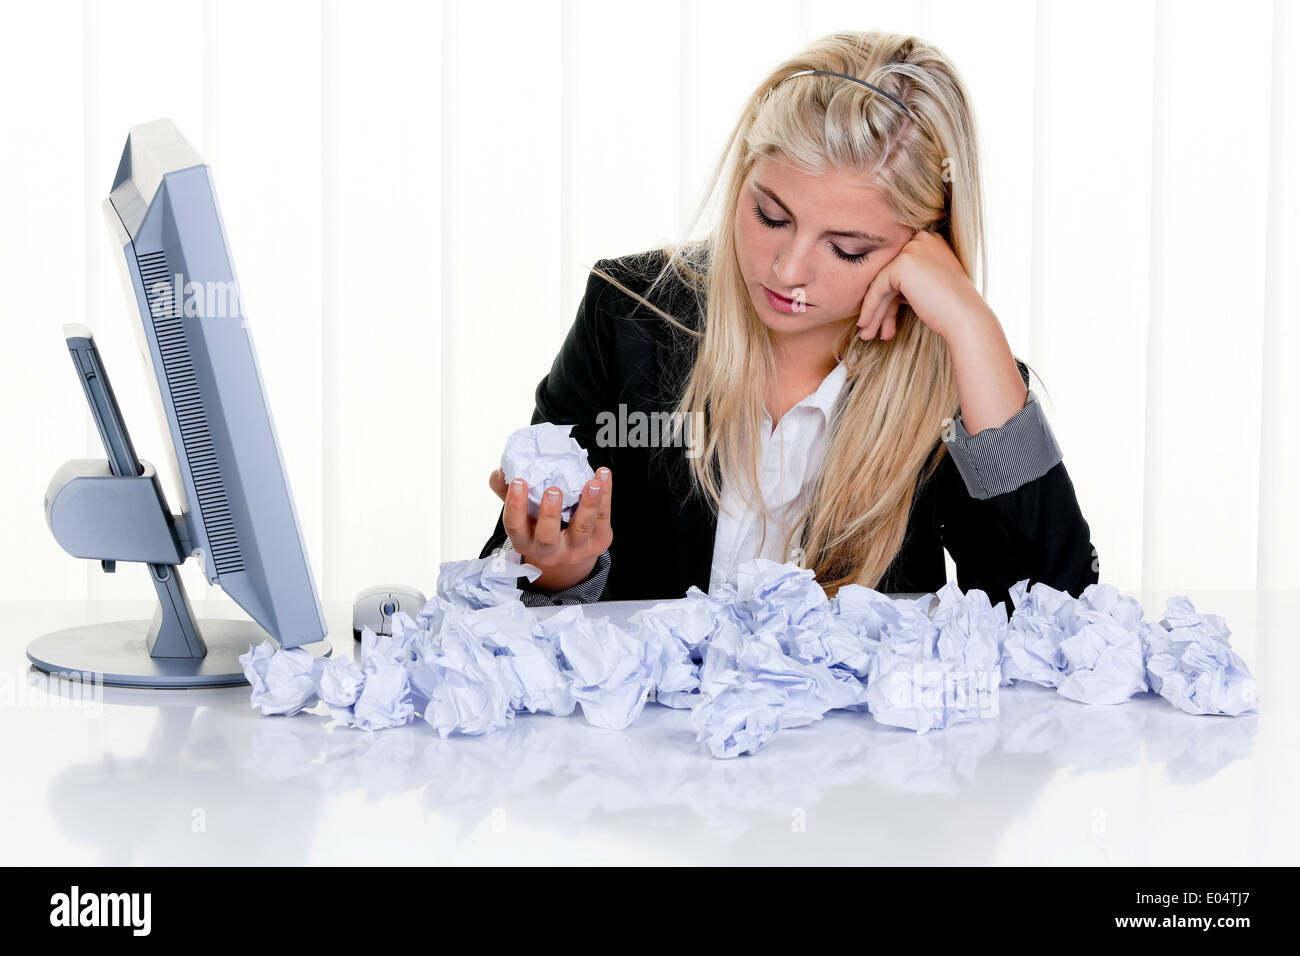 Young woman with of paper looks for idea, Junge Frau mit Papier sucht nach Idee Stock Photo